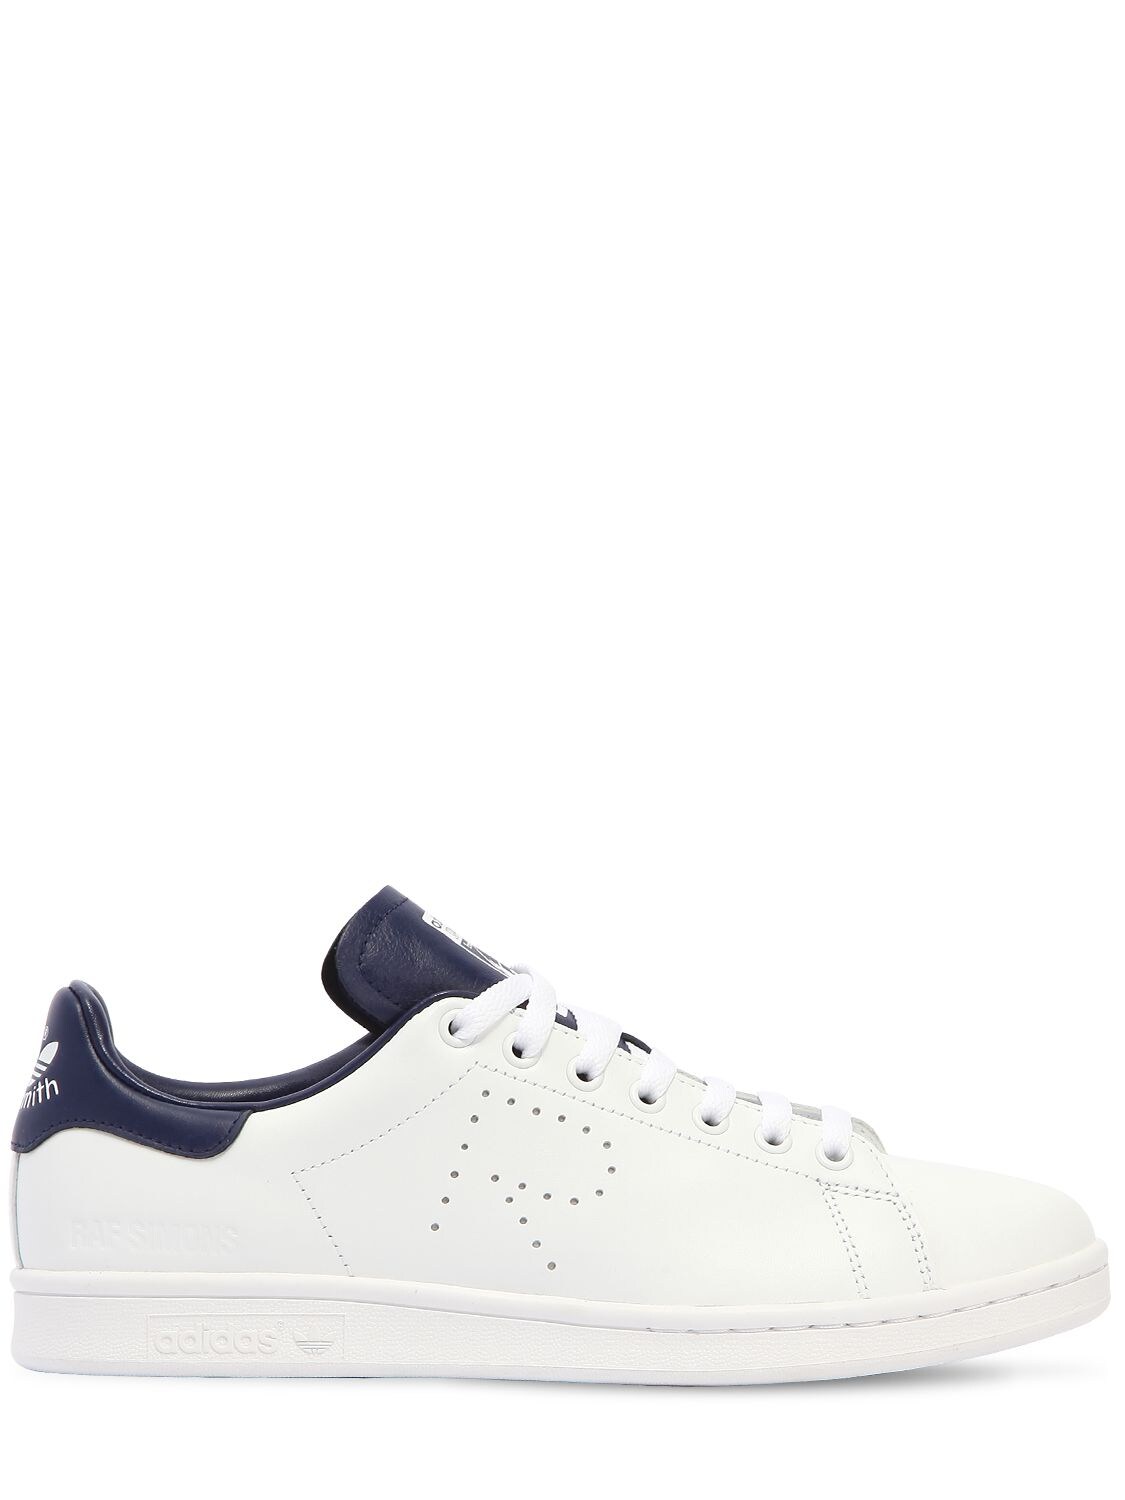 adidas stan smith removable insole